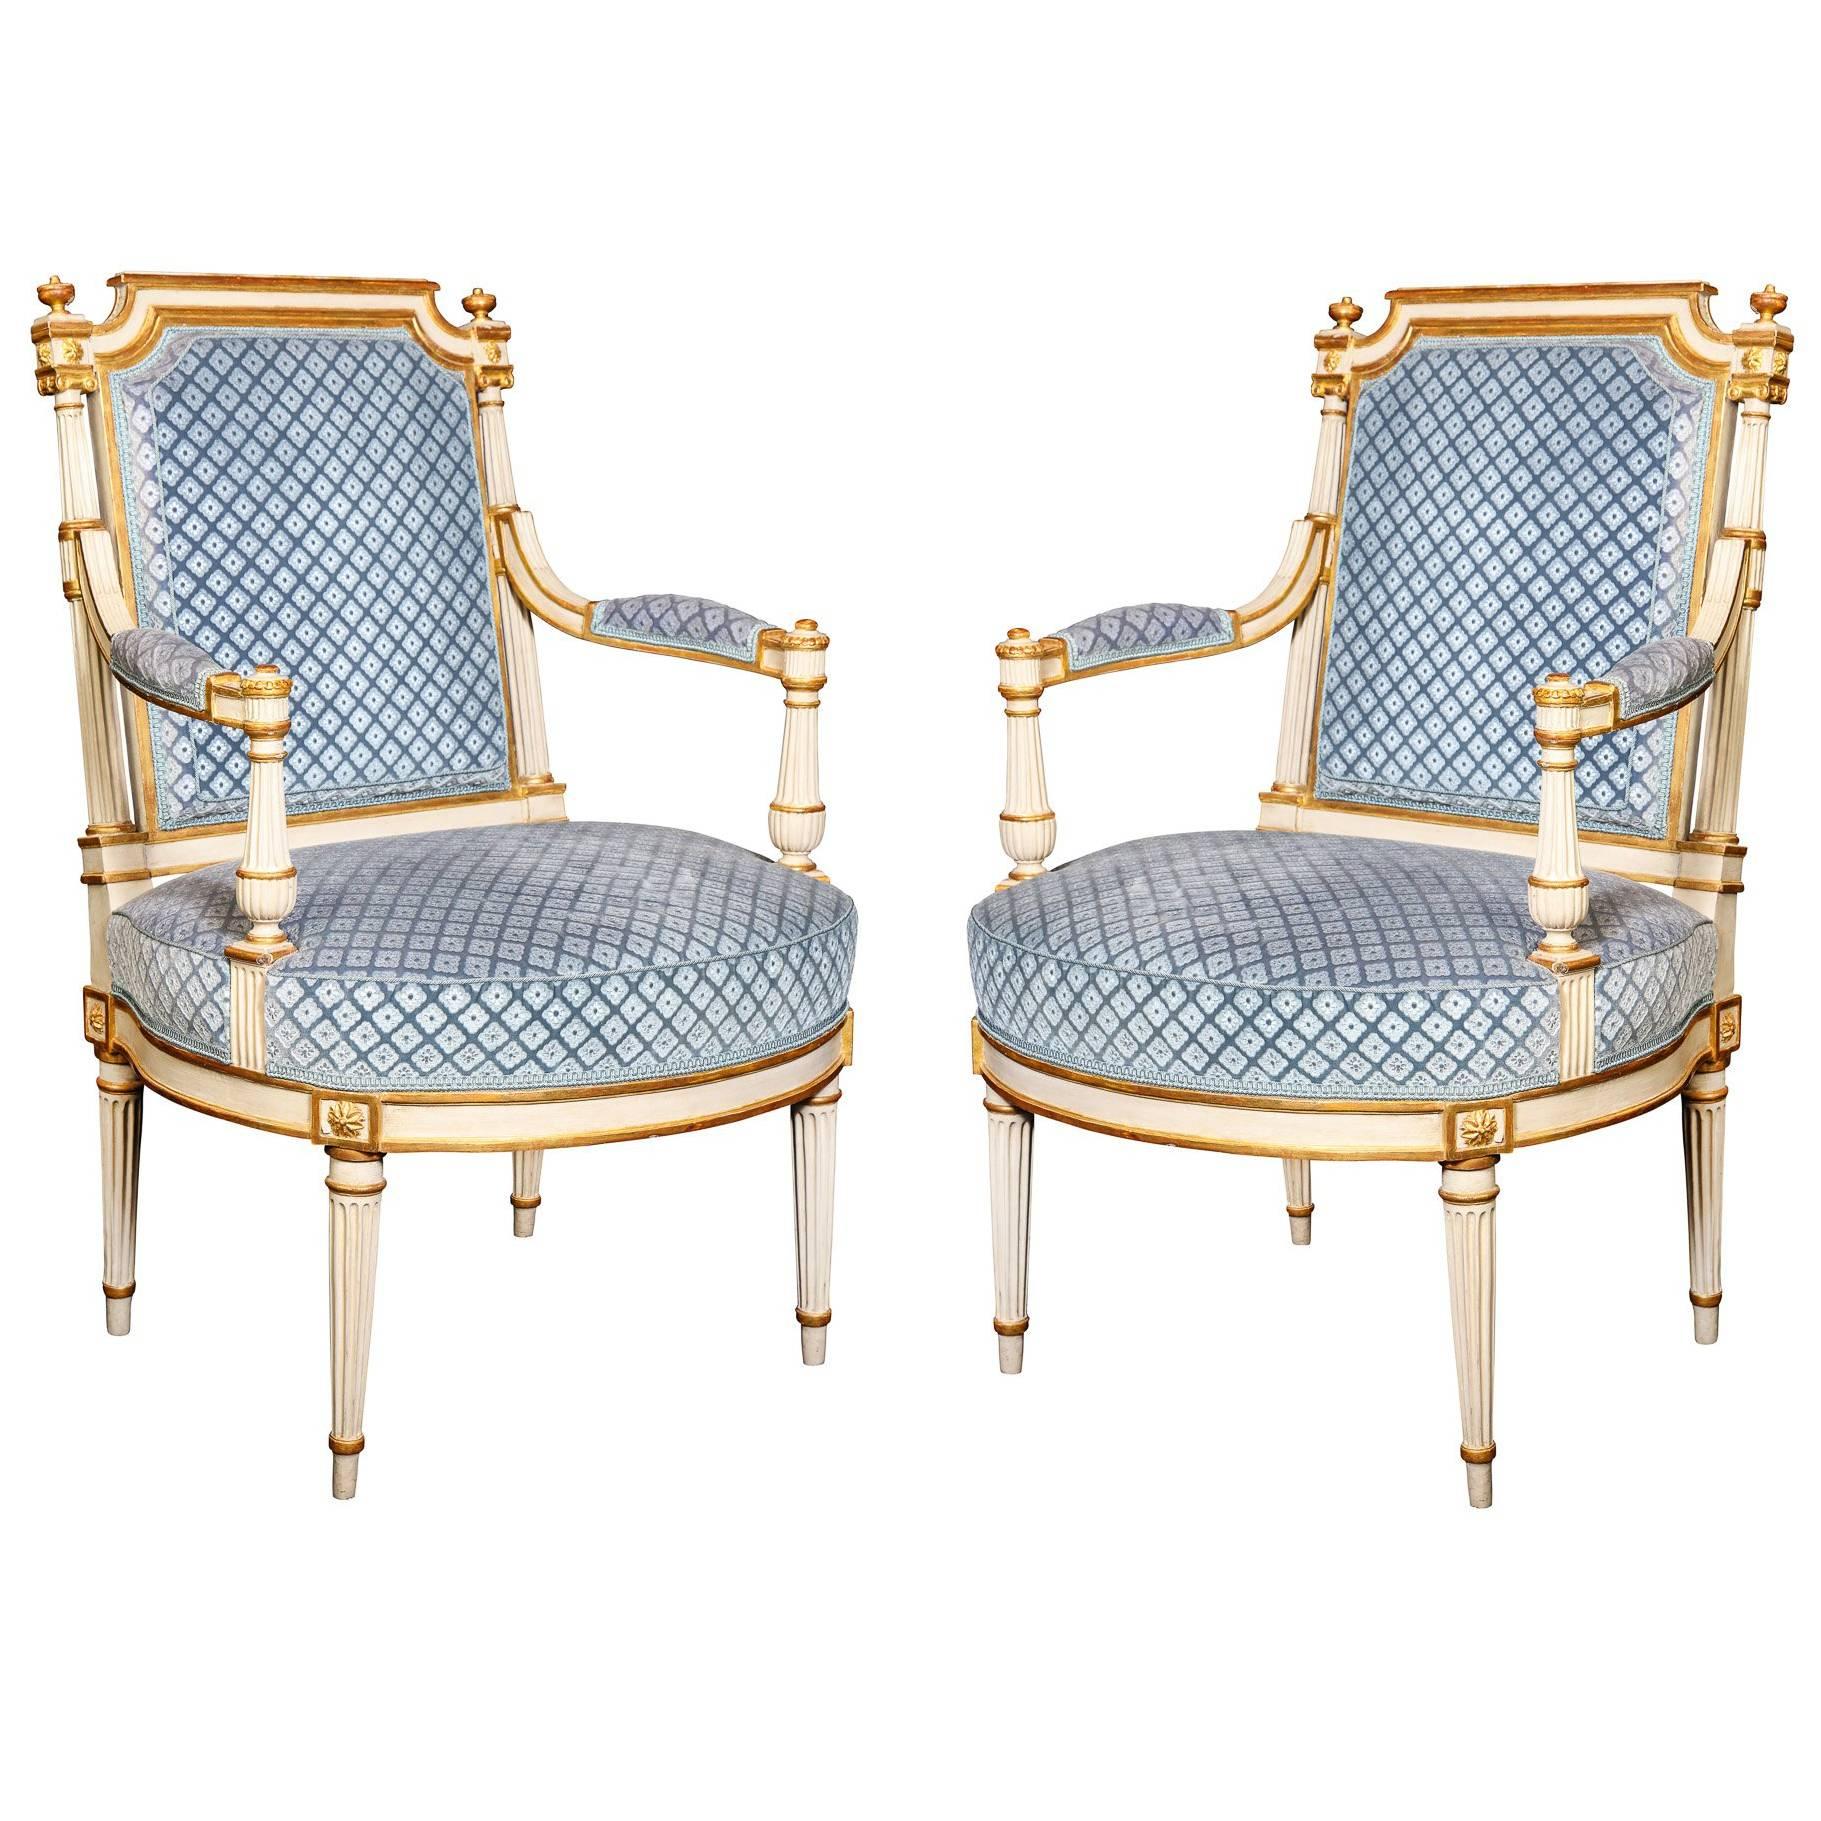 Pair of Antique French Louis XVI Carved Giltwood and Painted Armchairs